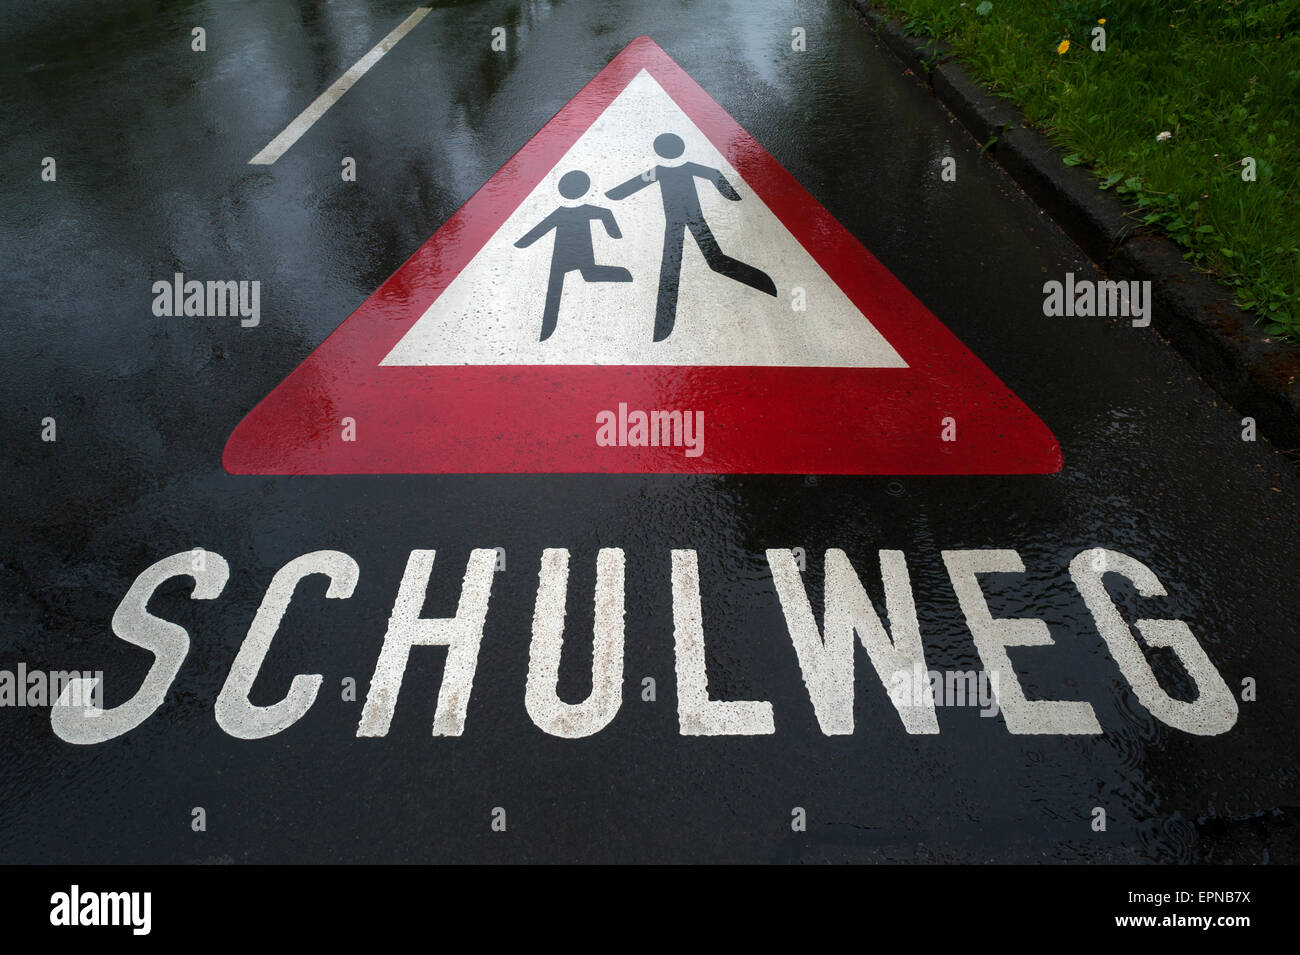 Schulweg, school path, warning sign painted on a wet road, in German, Hassfurt, Lower Franconia, Bavaria, Germany Stock Photo